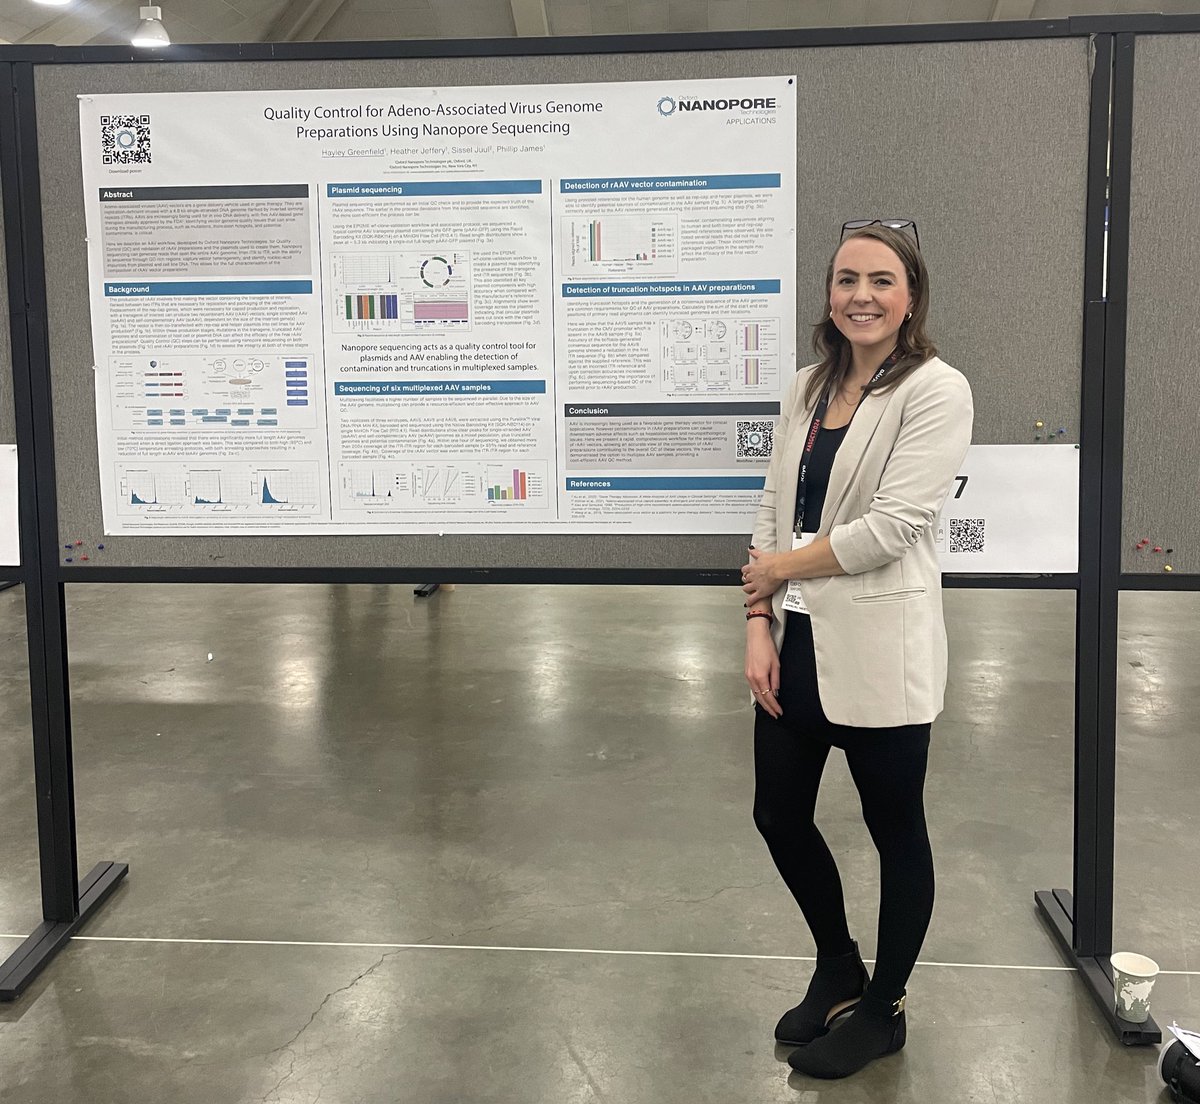 Come see me at #ASGCT poster 557 where we demonstrate the use of Nanopore sequencing for the QC of AAV vectors! #nanopore #AAV #qc nanoporetech.com/resource-centr…